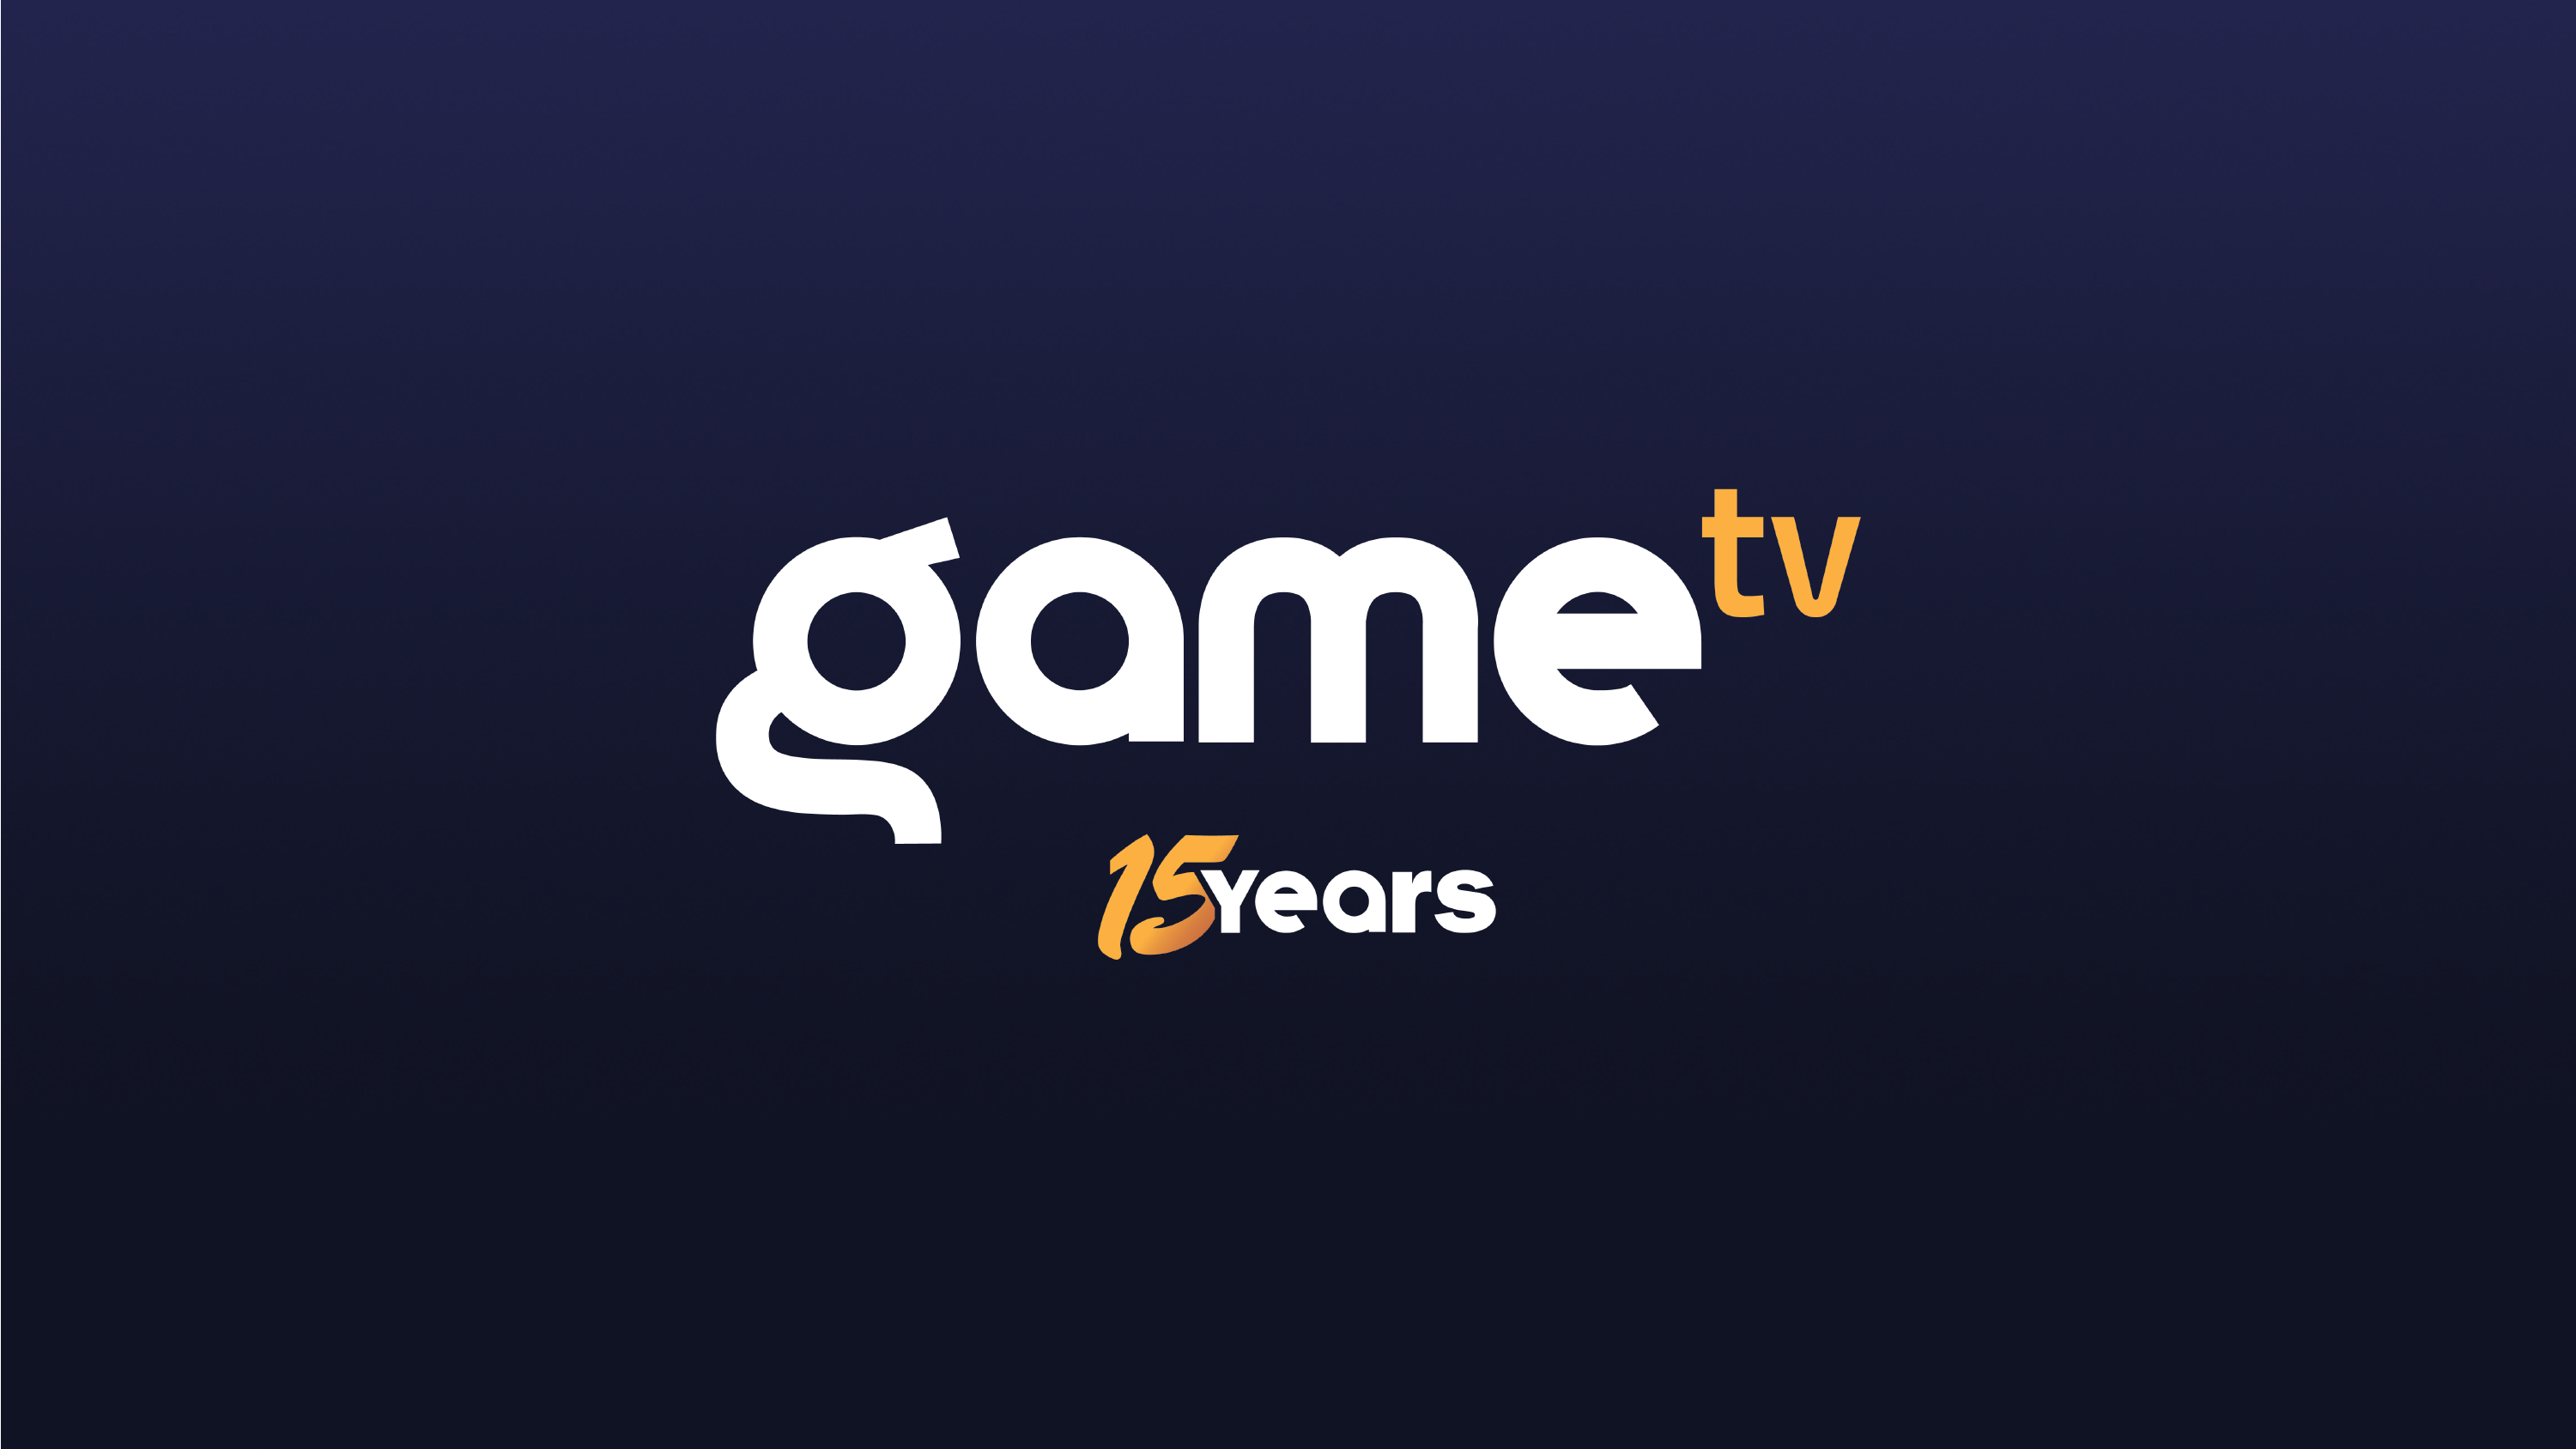 Contests & Promotions | GameTV Contests